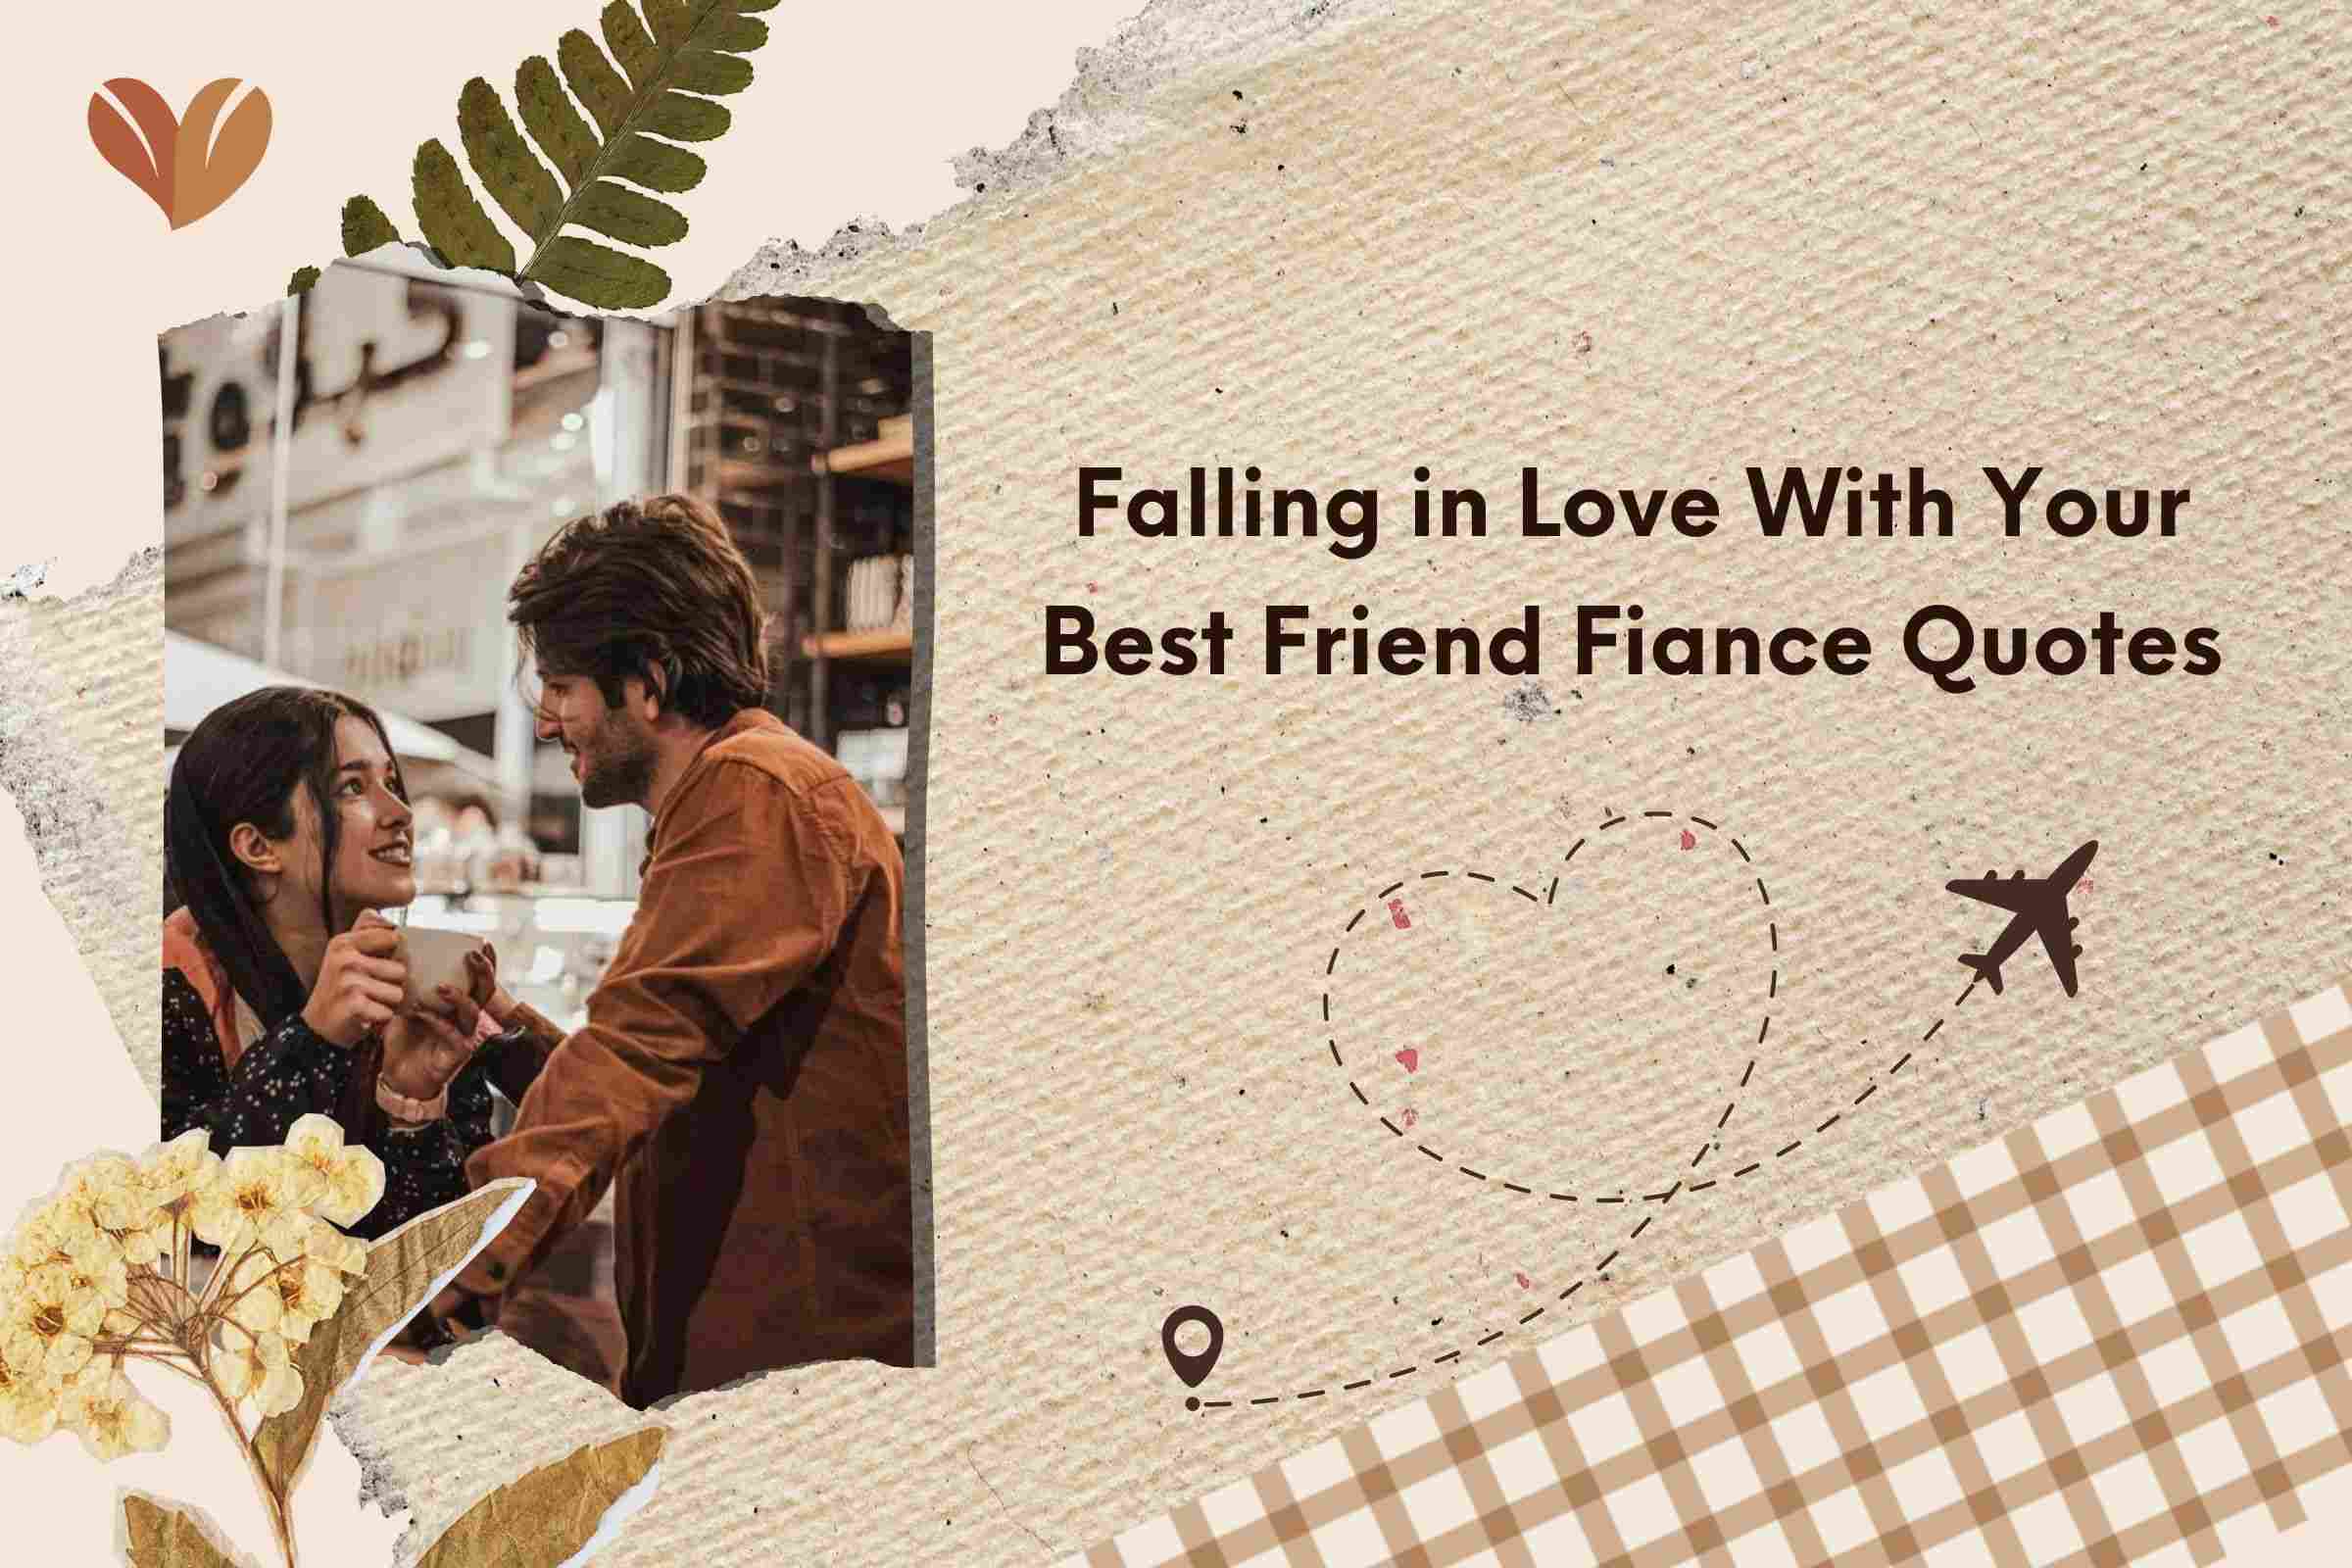 Falling in Love With Your Best Friend Fiance Quotes